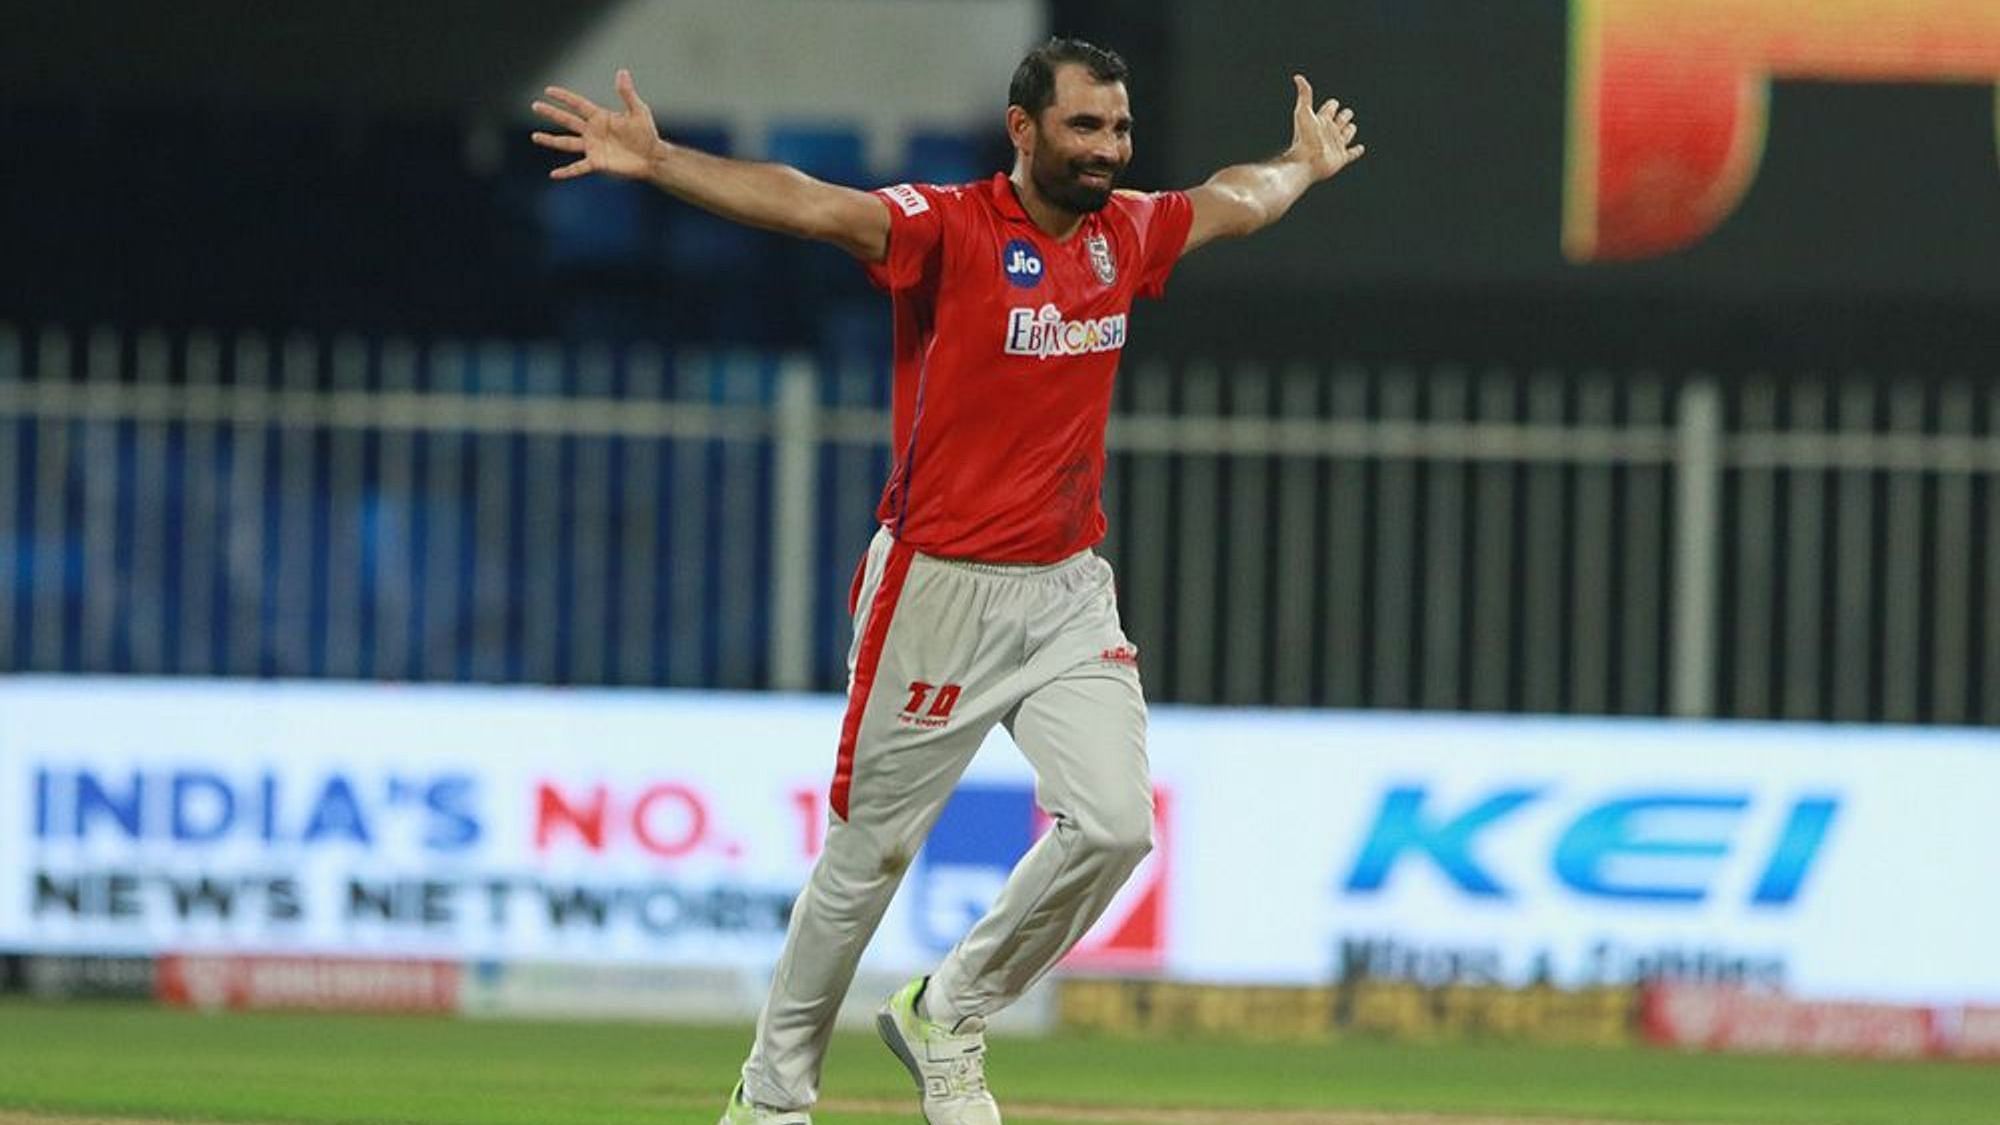 Kings XI Punjab’s Mohammad Shami leads the Purple Cap race for most wickets with 7 wickets in 3 games.